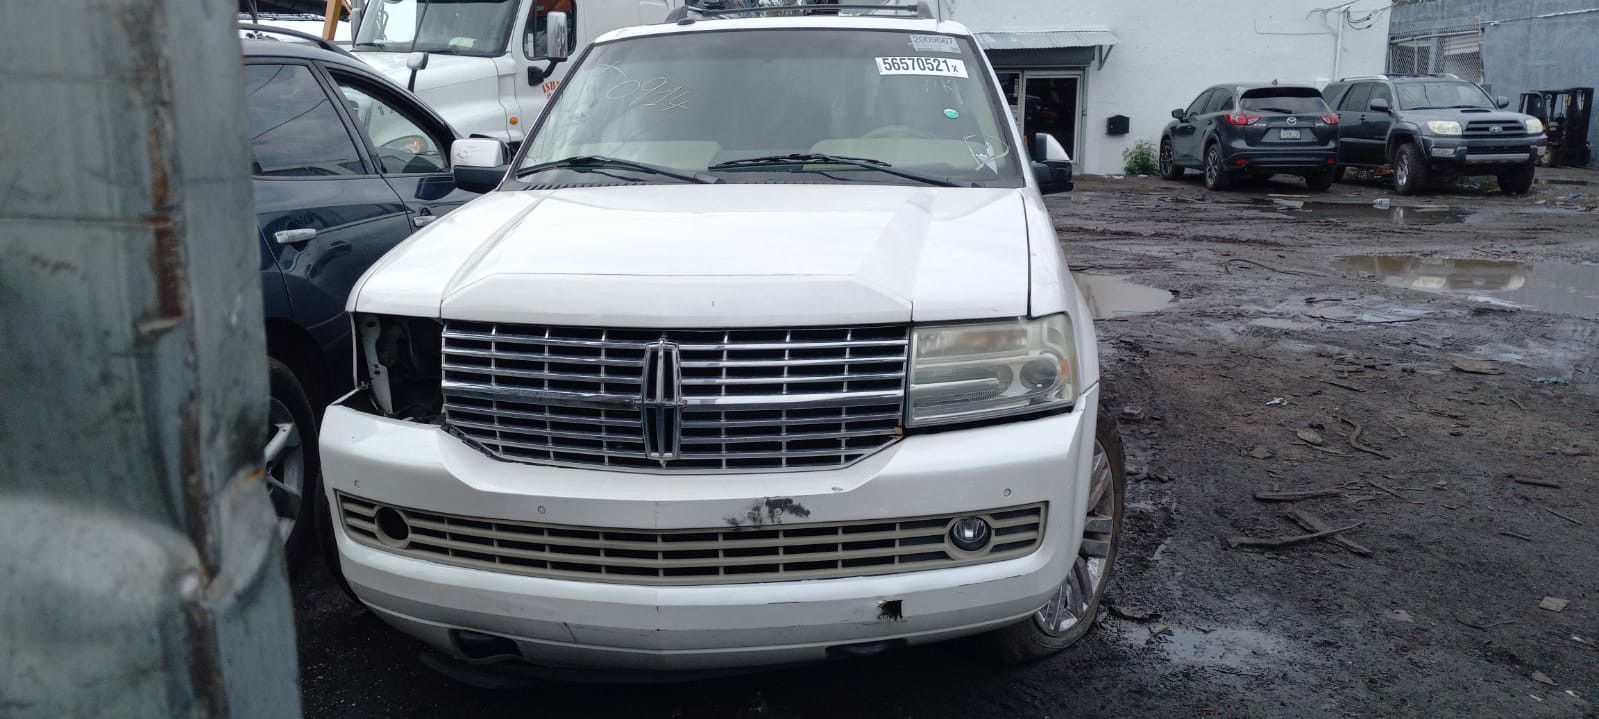 Lincoln Navigator 2009 Full Parts Out